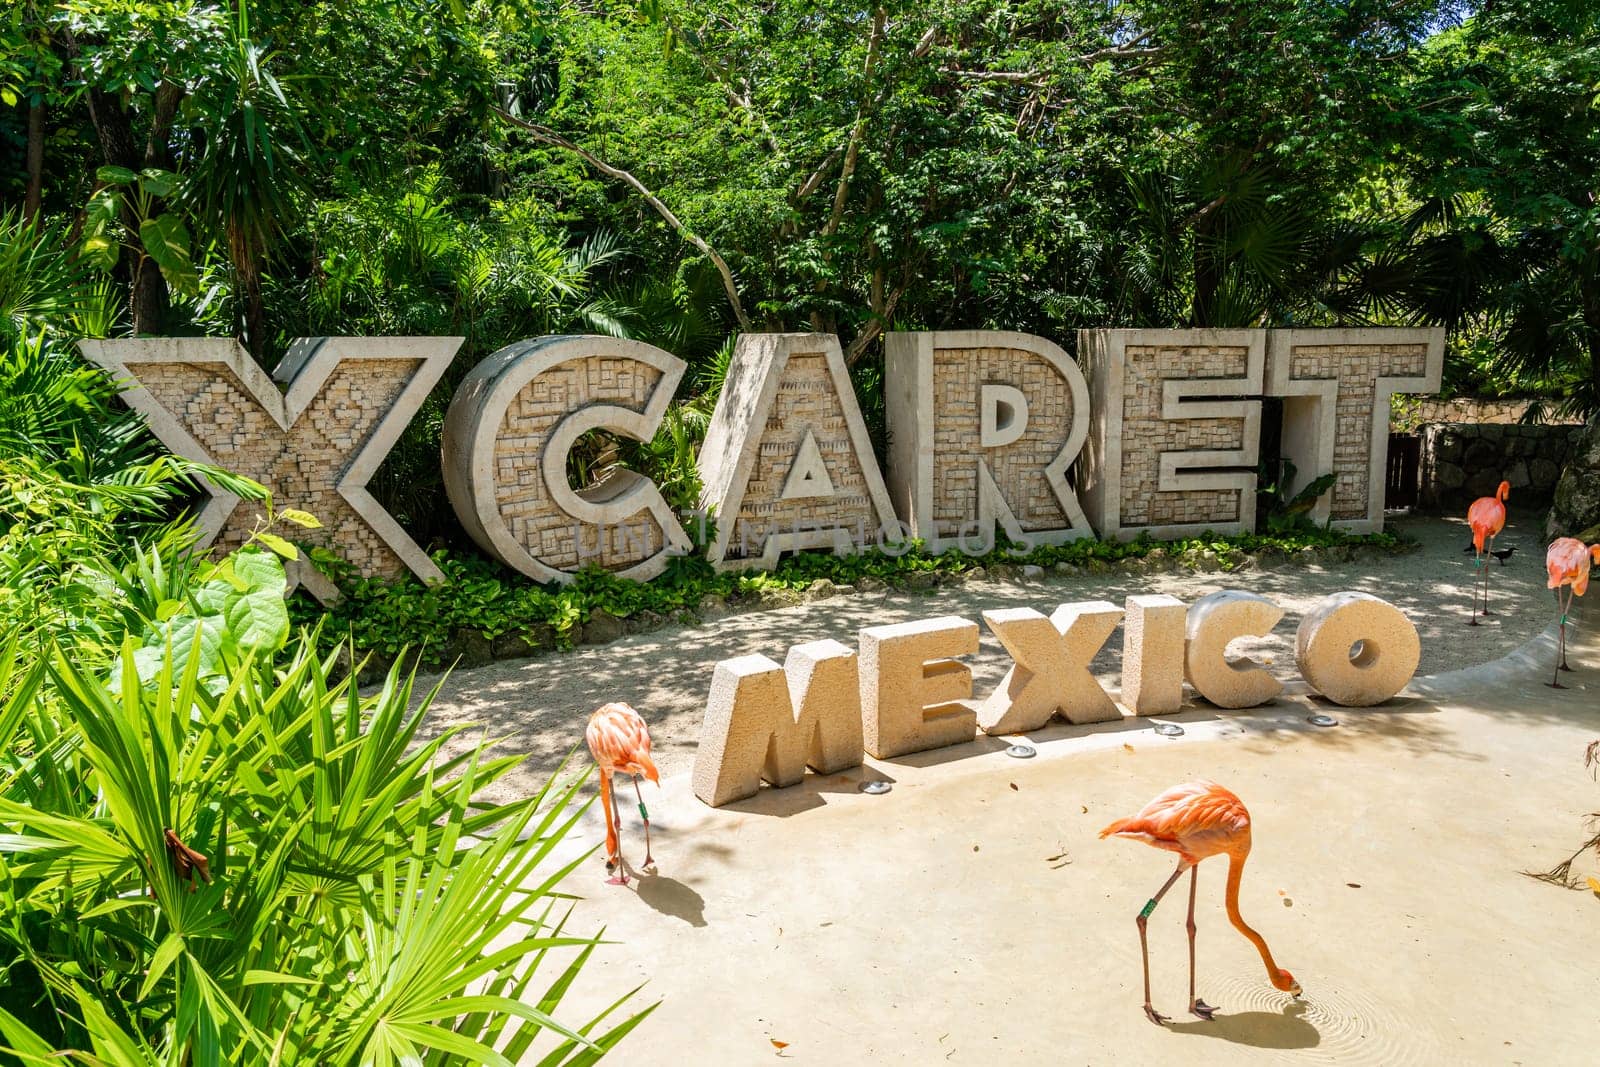 Cancun, Mexico - September 13, 2021: Xcaret theme park entrance sign with pink flamingo in Mexico by Mariakray